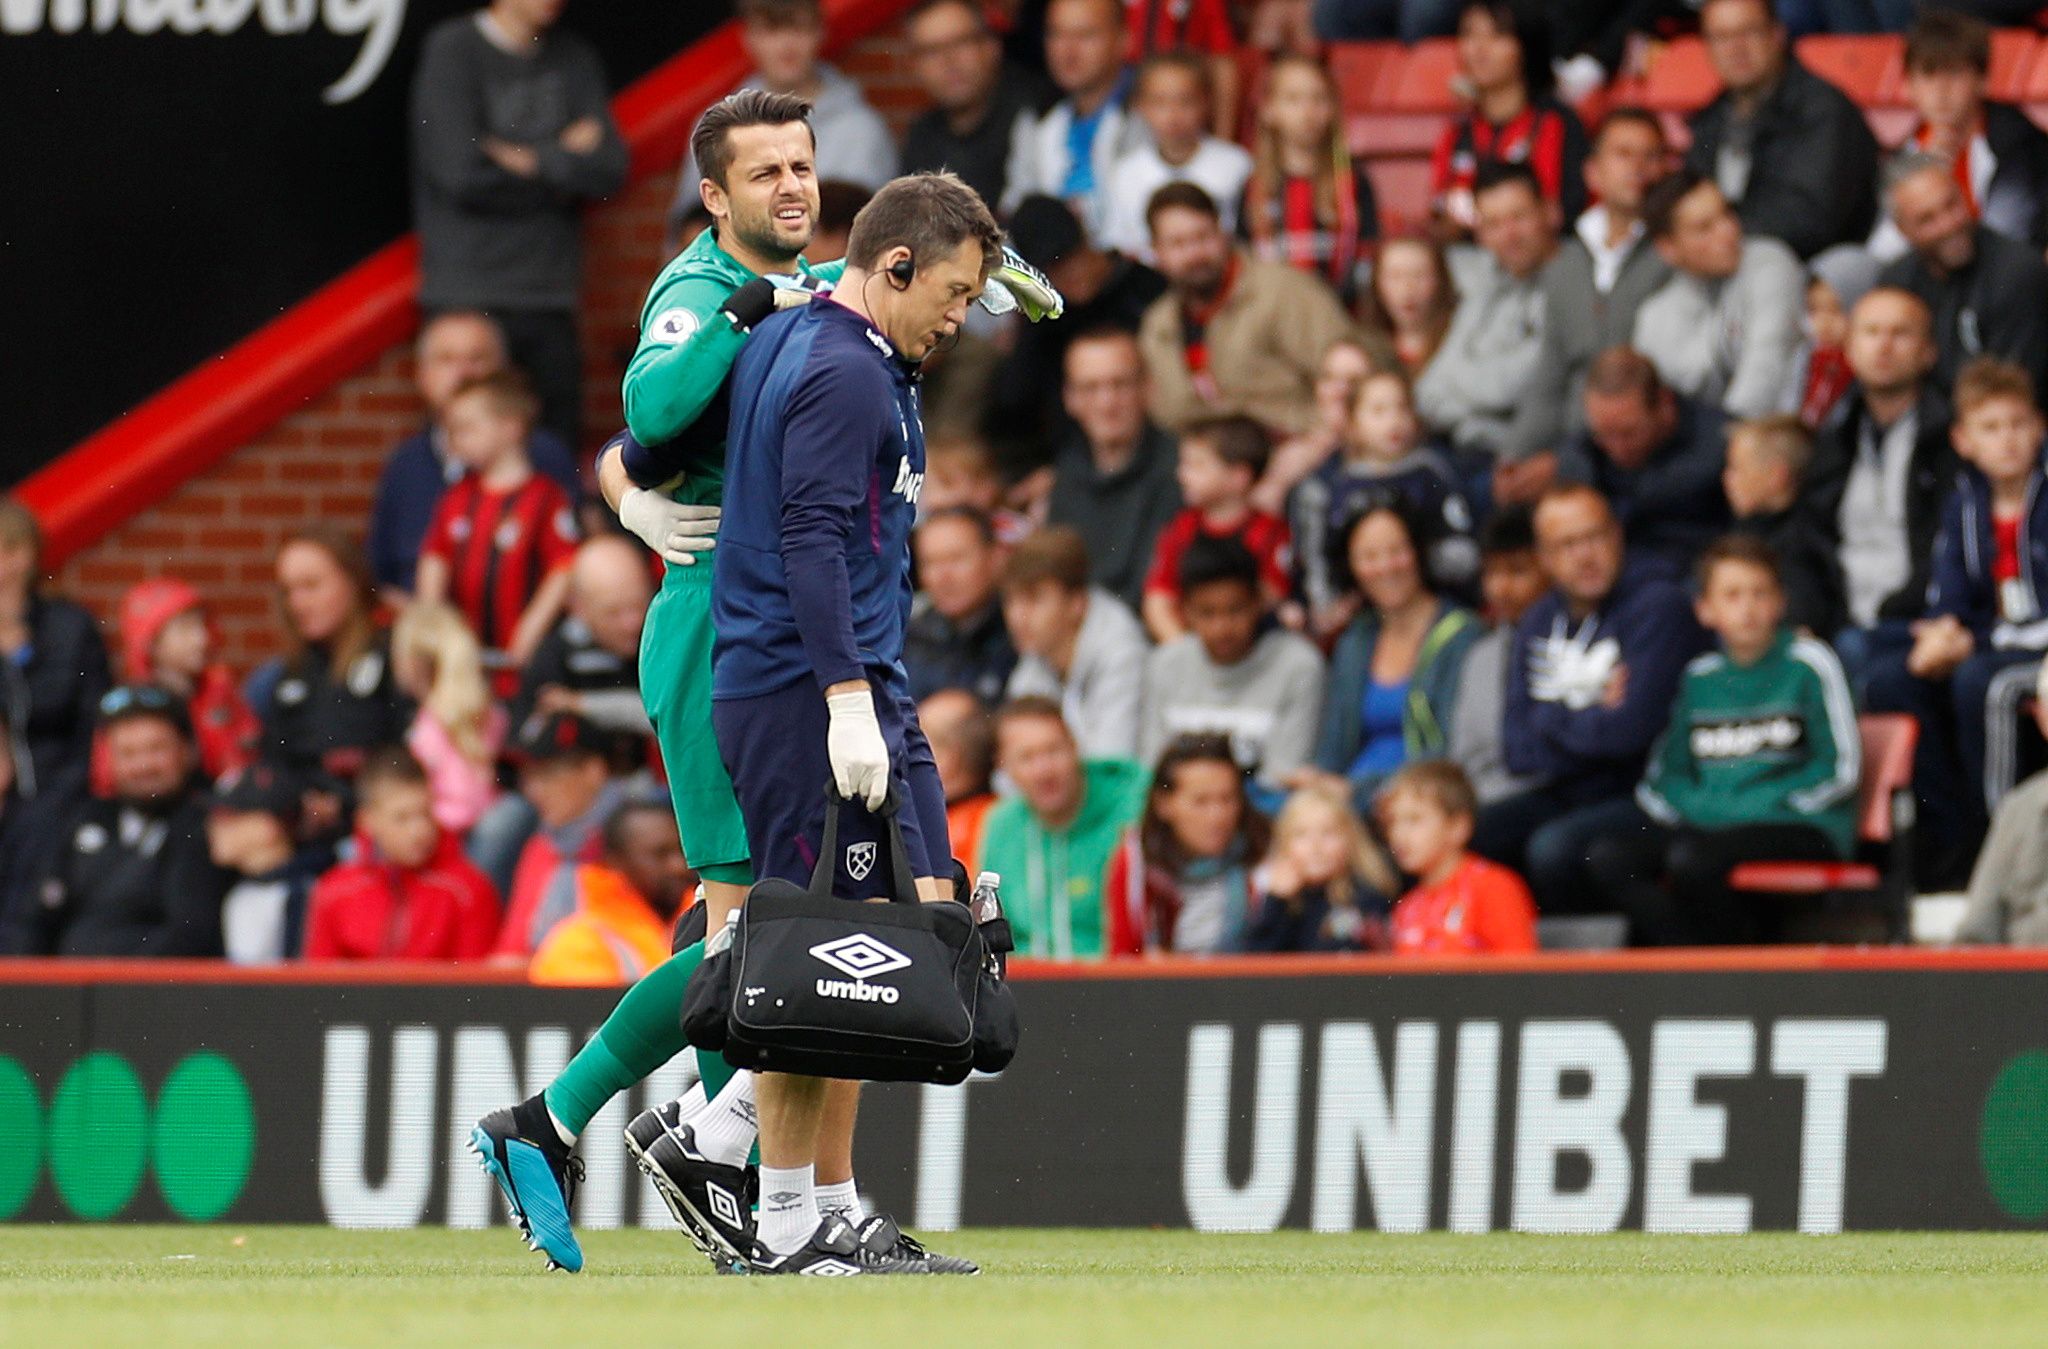 Soccer Football - Premier League - AFC Bournemouth v West Ham United - Vitality Stadium, Bournemouth, Britain - September 28, 2019  West Ham United's Lukasz Fabianski is helped off the pitch by medical staff after sustaining an injury   Action Images via Reuters/John Sibley  EDITORIAL USE ONLY. No use with unauthorized audio, video, data, fixture lists, club/league logos or 